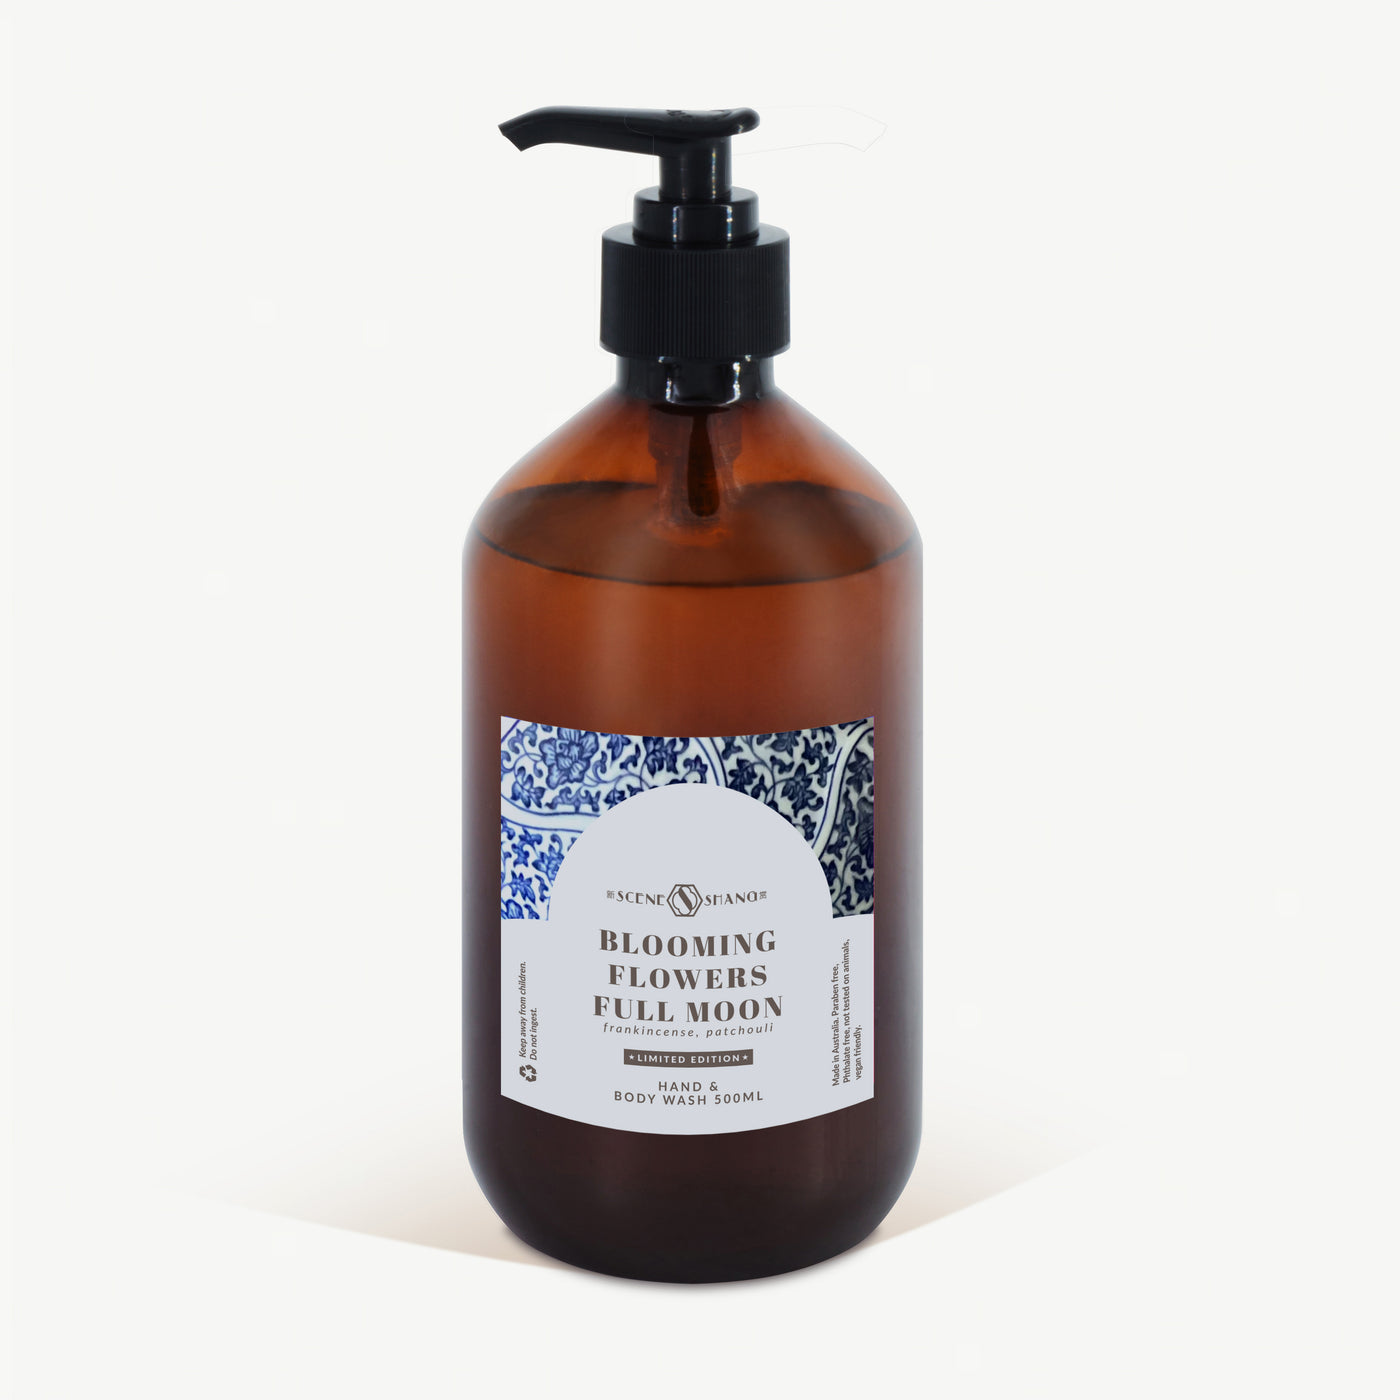 [LIMITED EDITION] BLOOMING FLOWERS FULL MOON Hand & Body Wash (Frankincense, Patchouli)